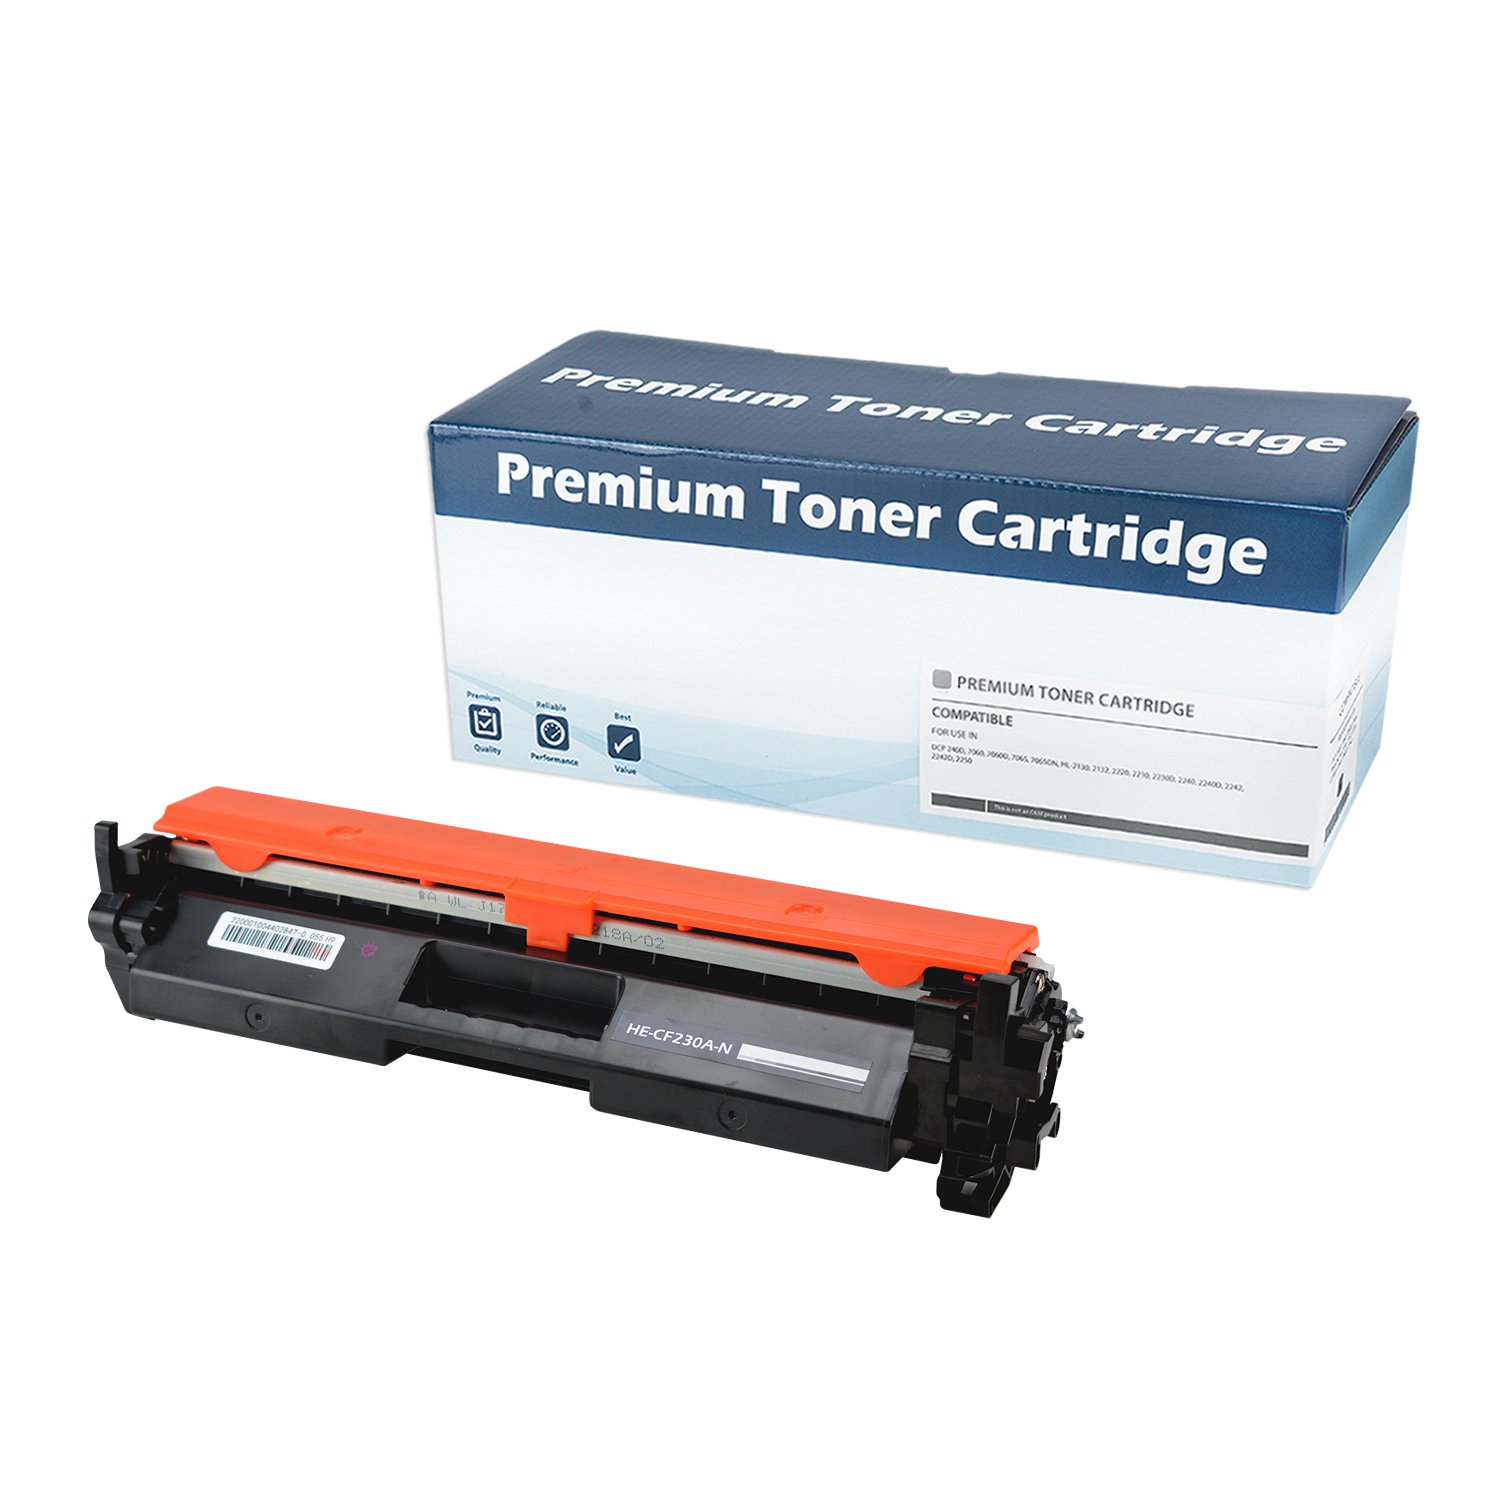 Premium Compatible for 30A (CF230A) Toner Cartridge, Black, 1.6K Yield (With C